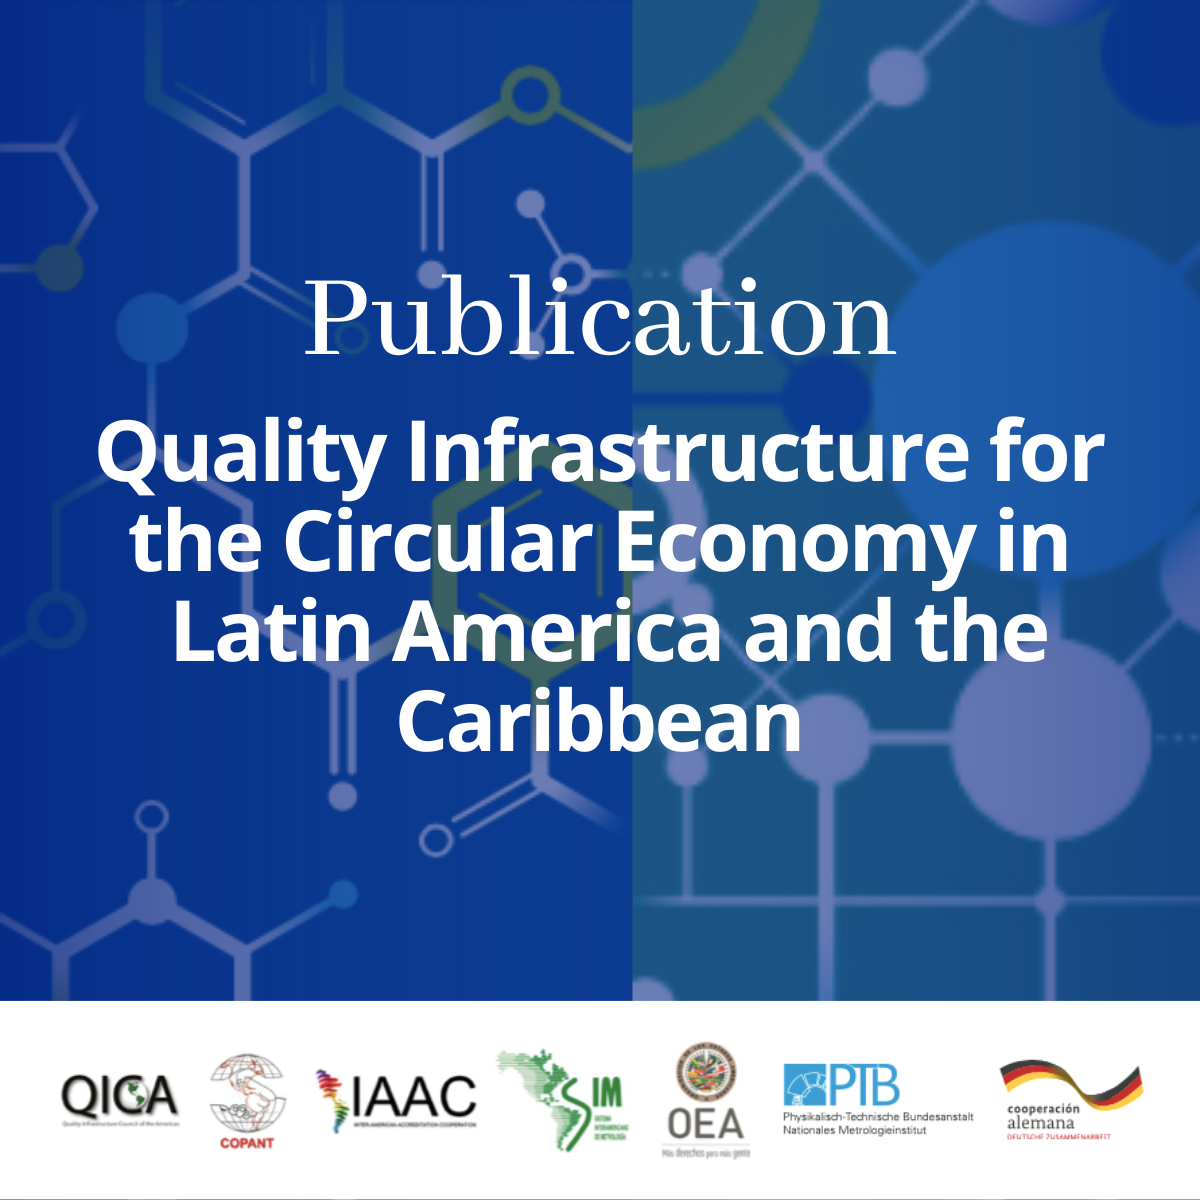 Quality Infrastructure for Circular Economy - QICA Publication